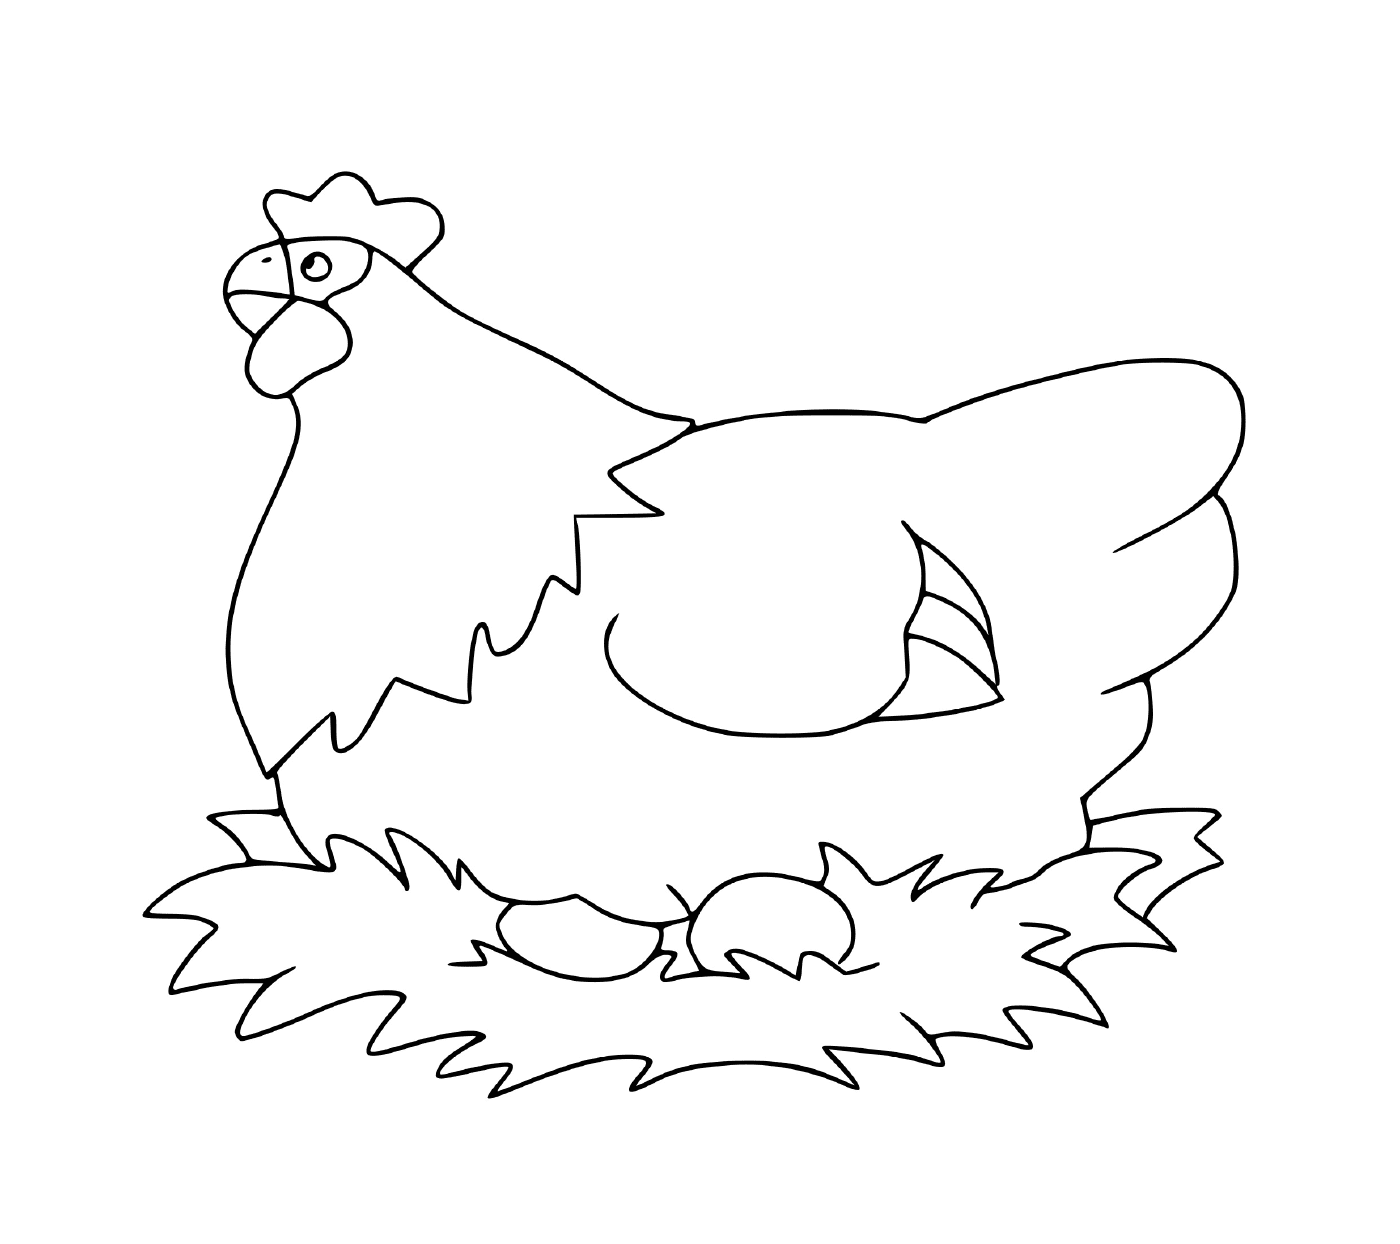  Gracious and proud chicken 